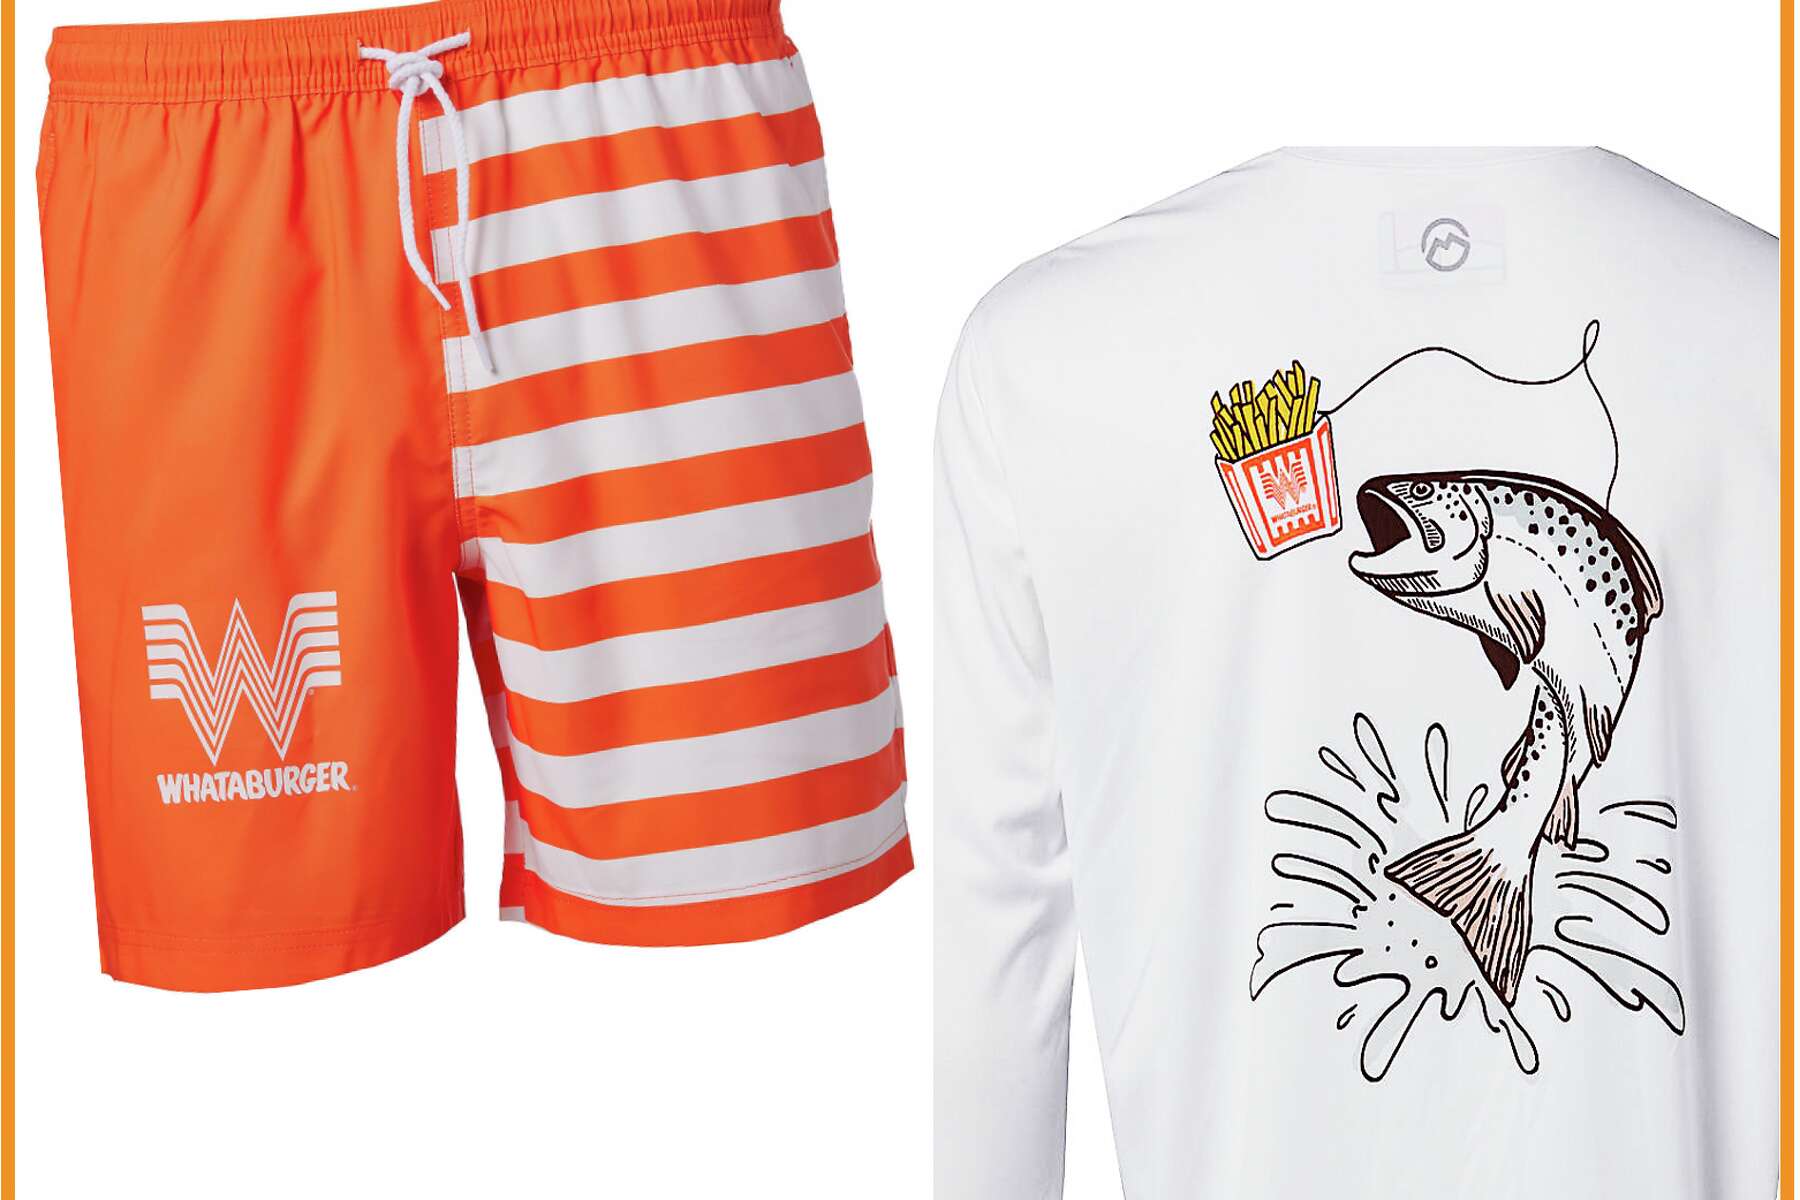 Whataburger and Academy Sports + Outdoors serve up some cool apparel ahead  of hot summer months